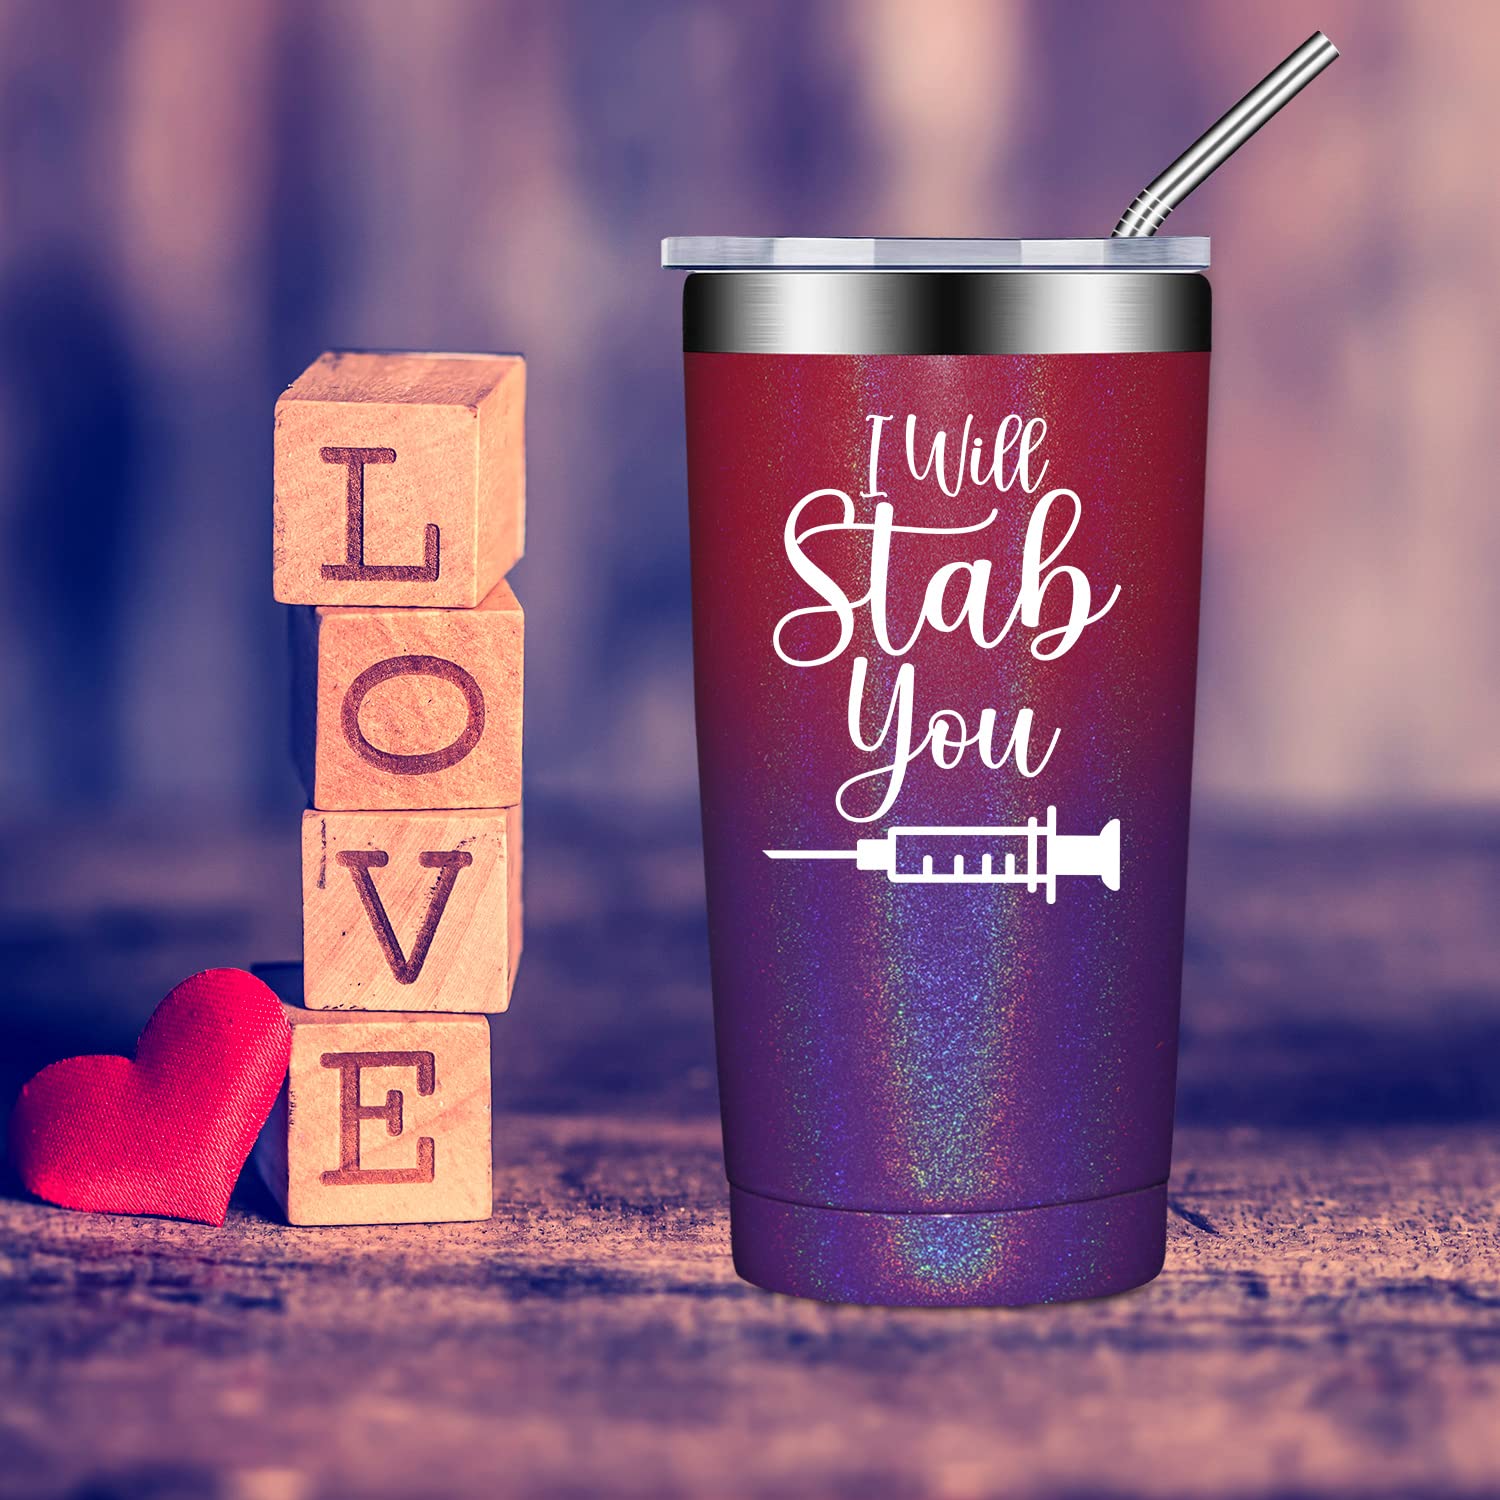 Fufandi I Will Stab You Nurse Tumbler - Nurse Gifts for Women - Nurse Practitioner Gifts - Funny Nurses Birthday, Appreciation, Christmas, Week Day Gifts for Nurses, Doctors, Assistant - Tumbler Cup